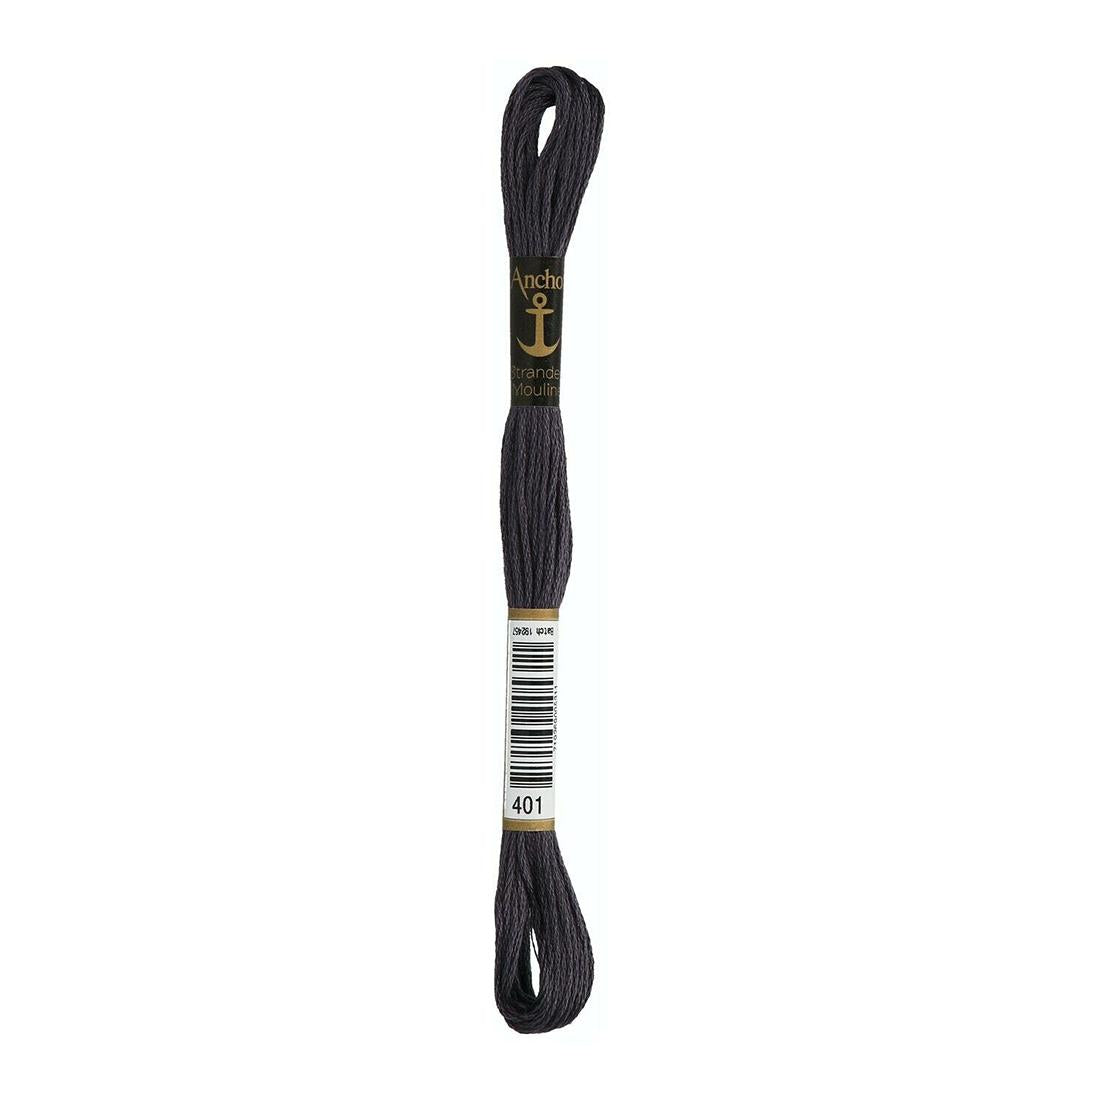 Anchor Embroidery Floss 403 Black - 719269005328